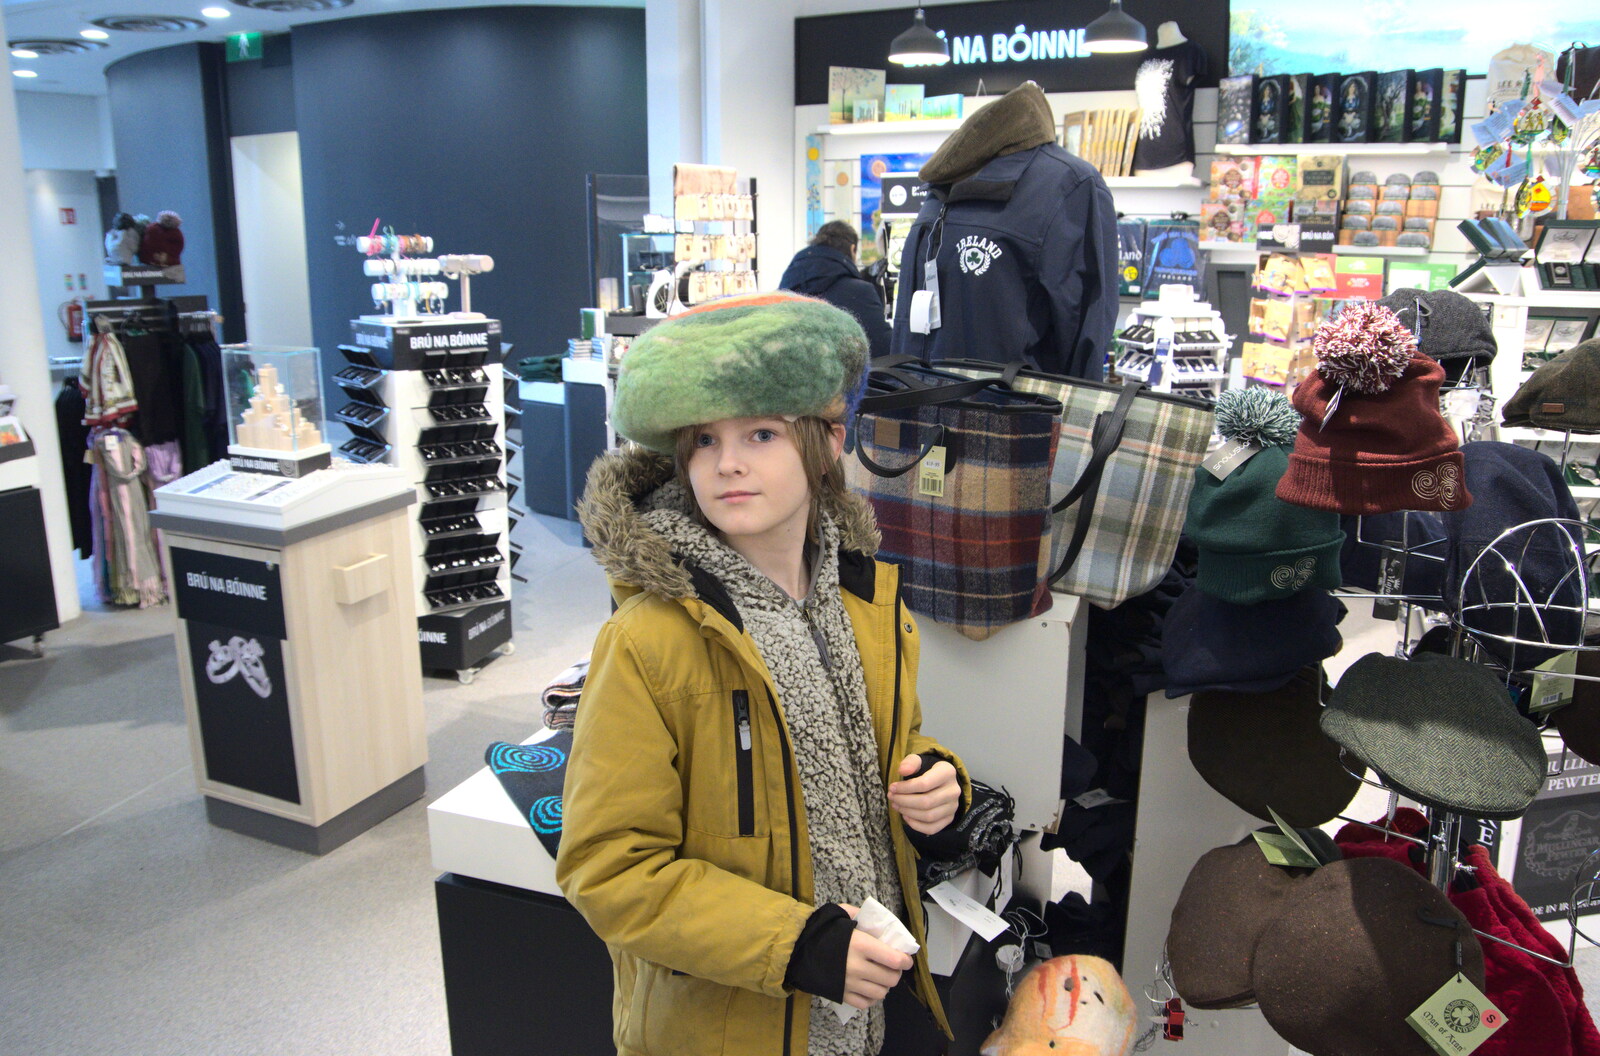 Blackrock North and Newgrange, County Louth, Ireland - 16th February 2023: Harry tests a hat out in the gift shop